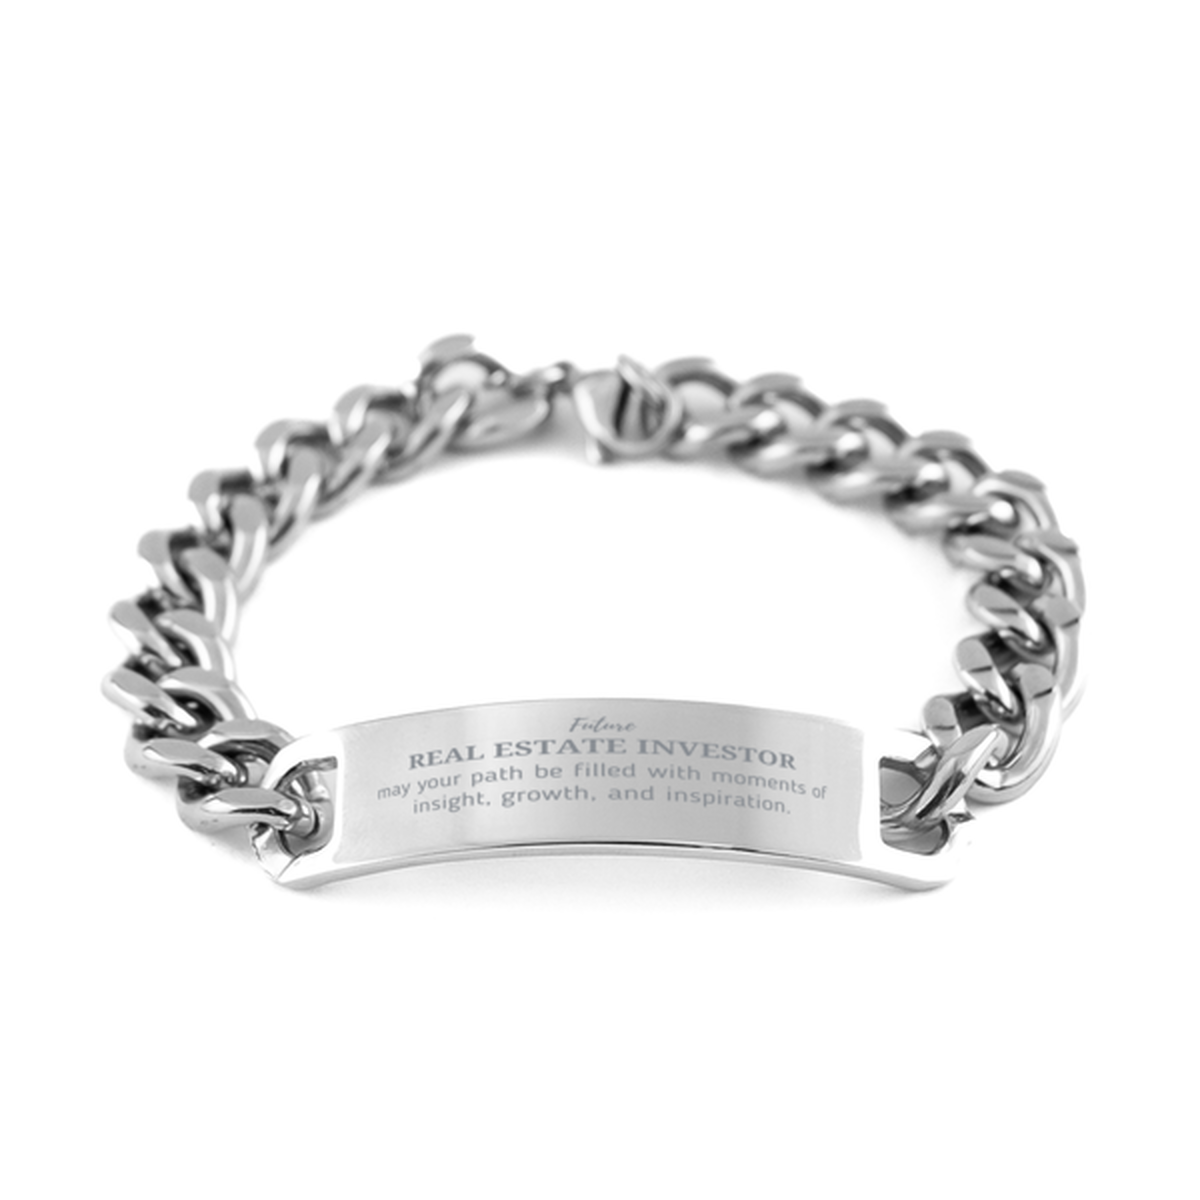 Future Real Estate Investor Gifts, May your path be filled with moments of insight, Graduation Gifts for New Real Estate Investor, Christmas Unique Cuban Chain Stainless Steel Bracelet For Men, Women, Friends